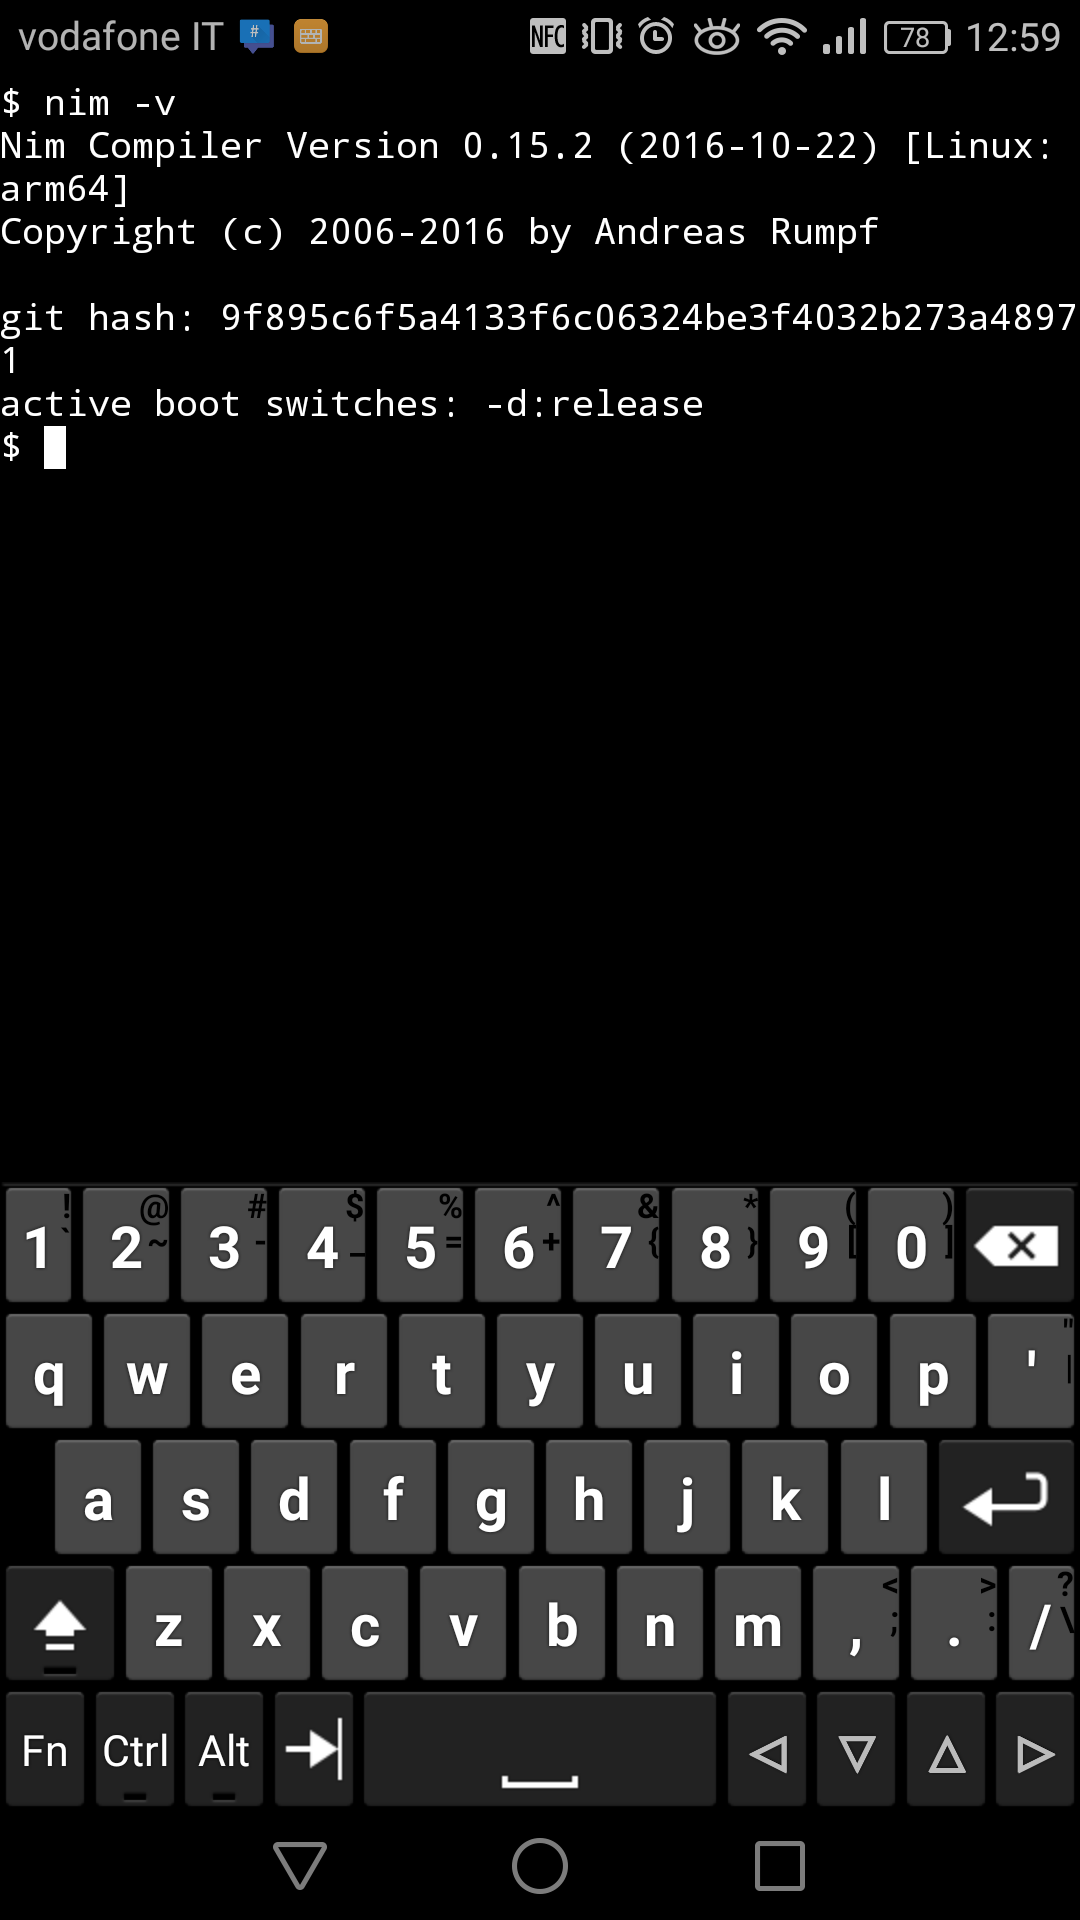 nim -v on android